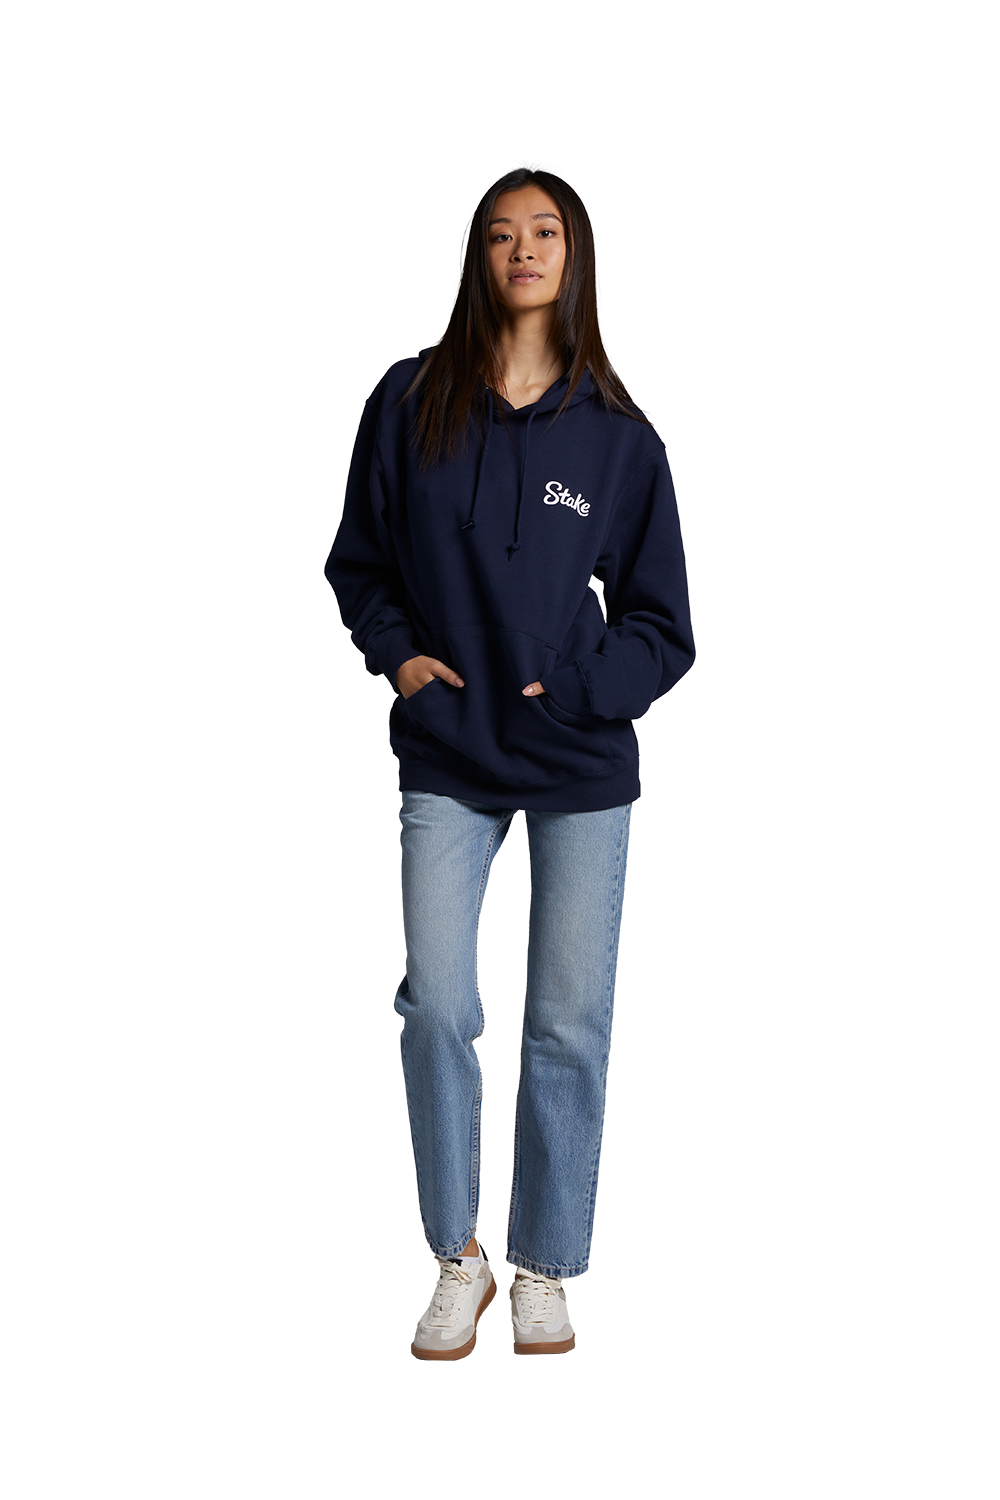 White on Navy Stake Hoodie